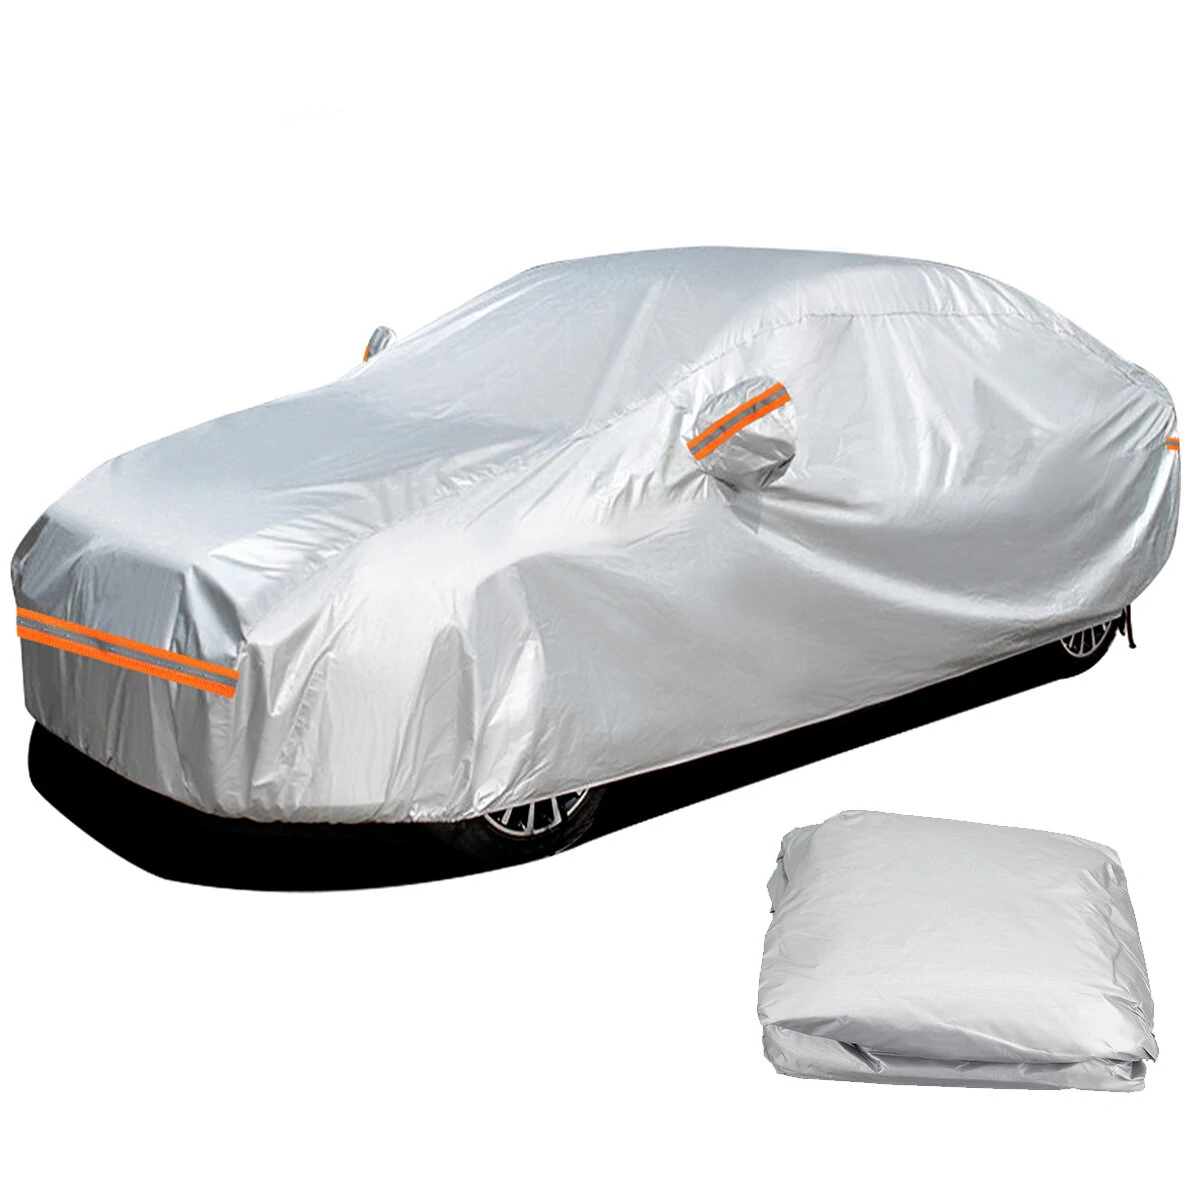 Full Car Sedan Cover Outdoor Waterproof Dust Scratch UV Protection Size S XXL